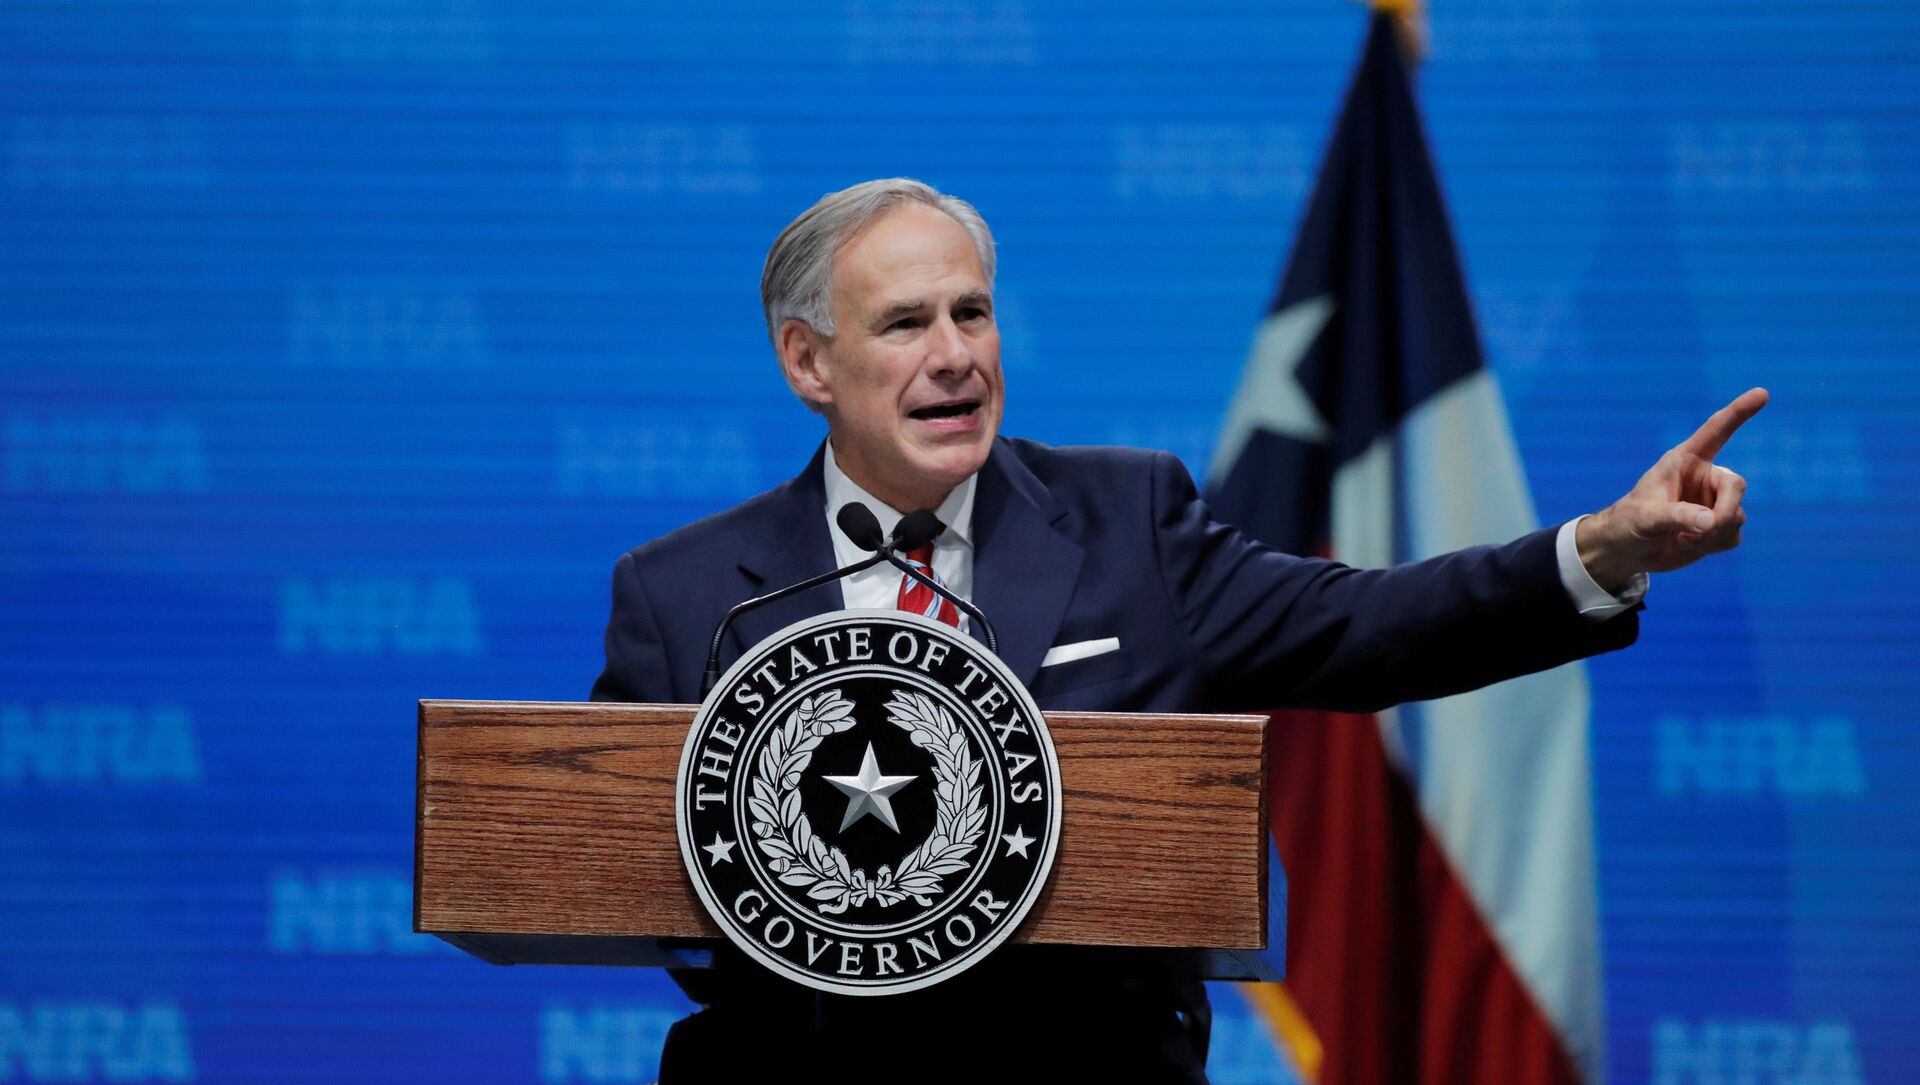 Texas Governor Greg Abbott speaks at the annual National Rifle Association (NRA) convention in Dallas, Texas, U.S., May 4, 2018 - Sputnik International, 1920, 08.03.2021